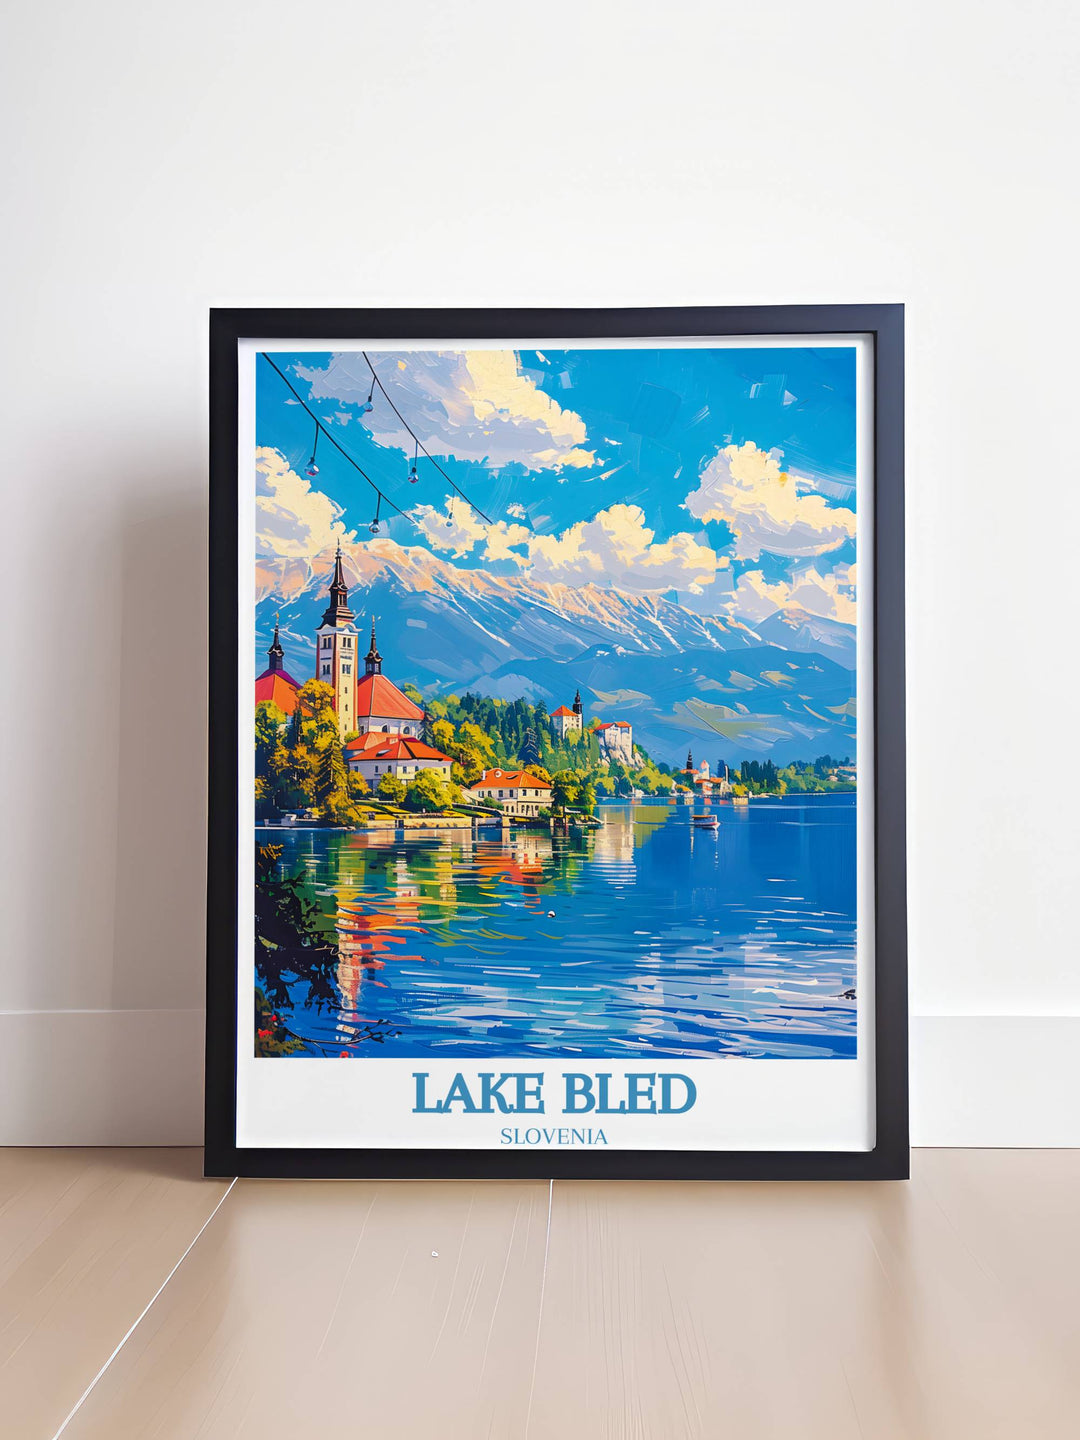 Artistic representation of Bled Castle, steeped in history, showcased in a Slovenia Art Print for cultural aficionados and history buffs who appreciate the architectural beauty and heritage of iconic landmarks